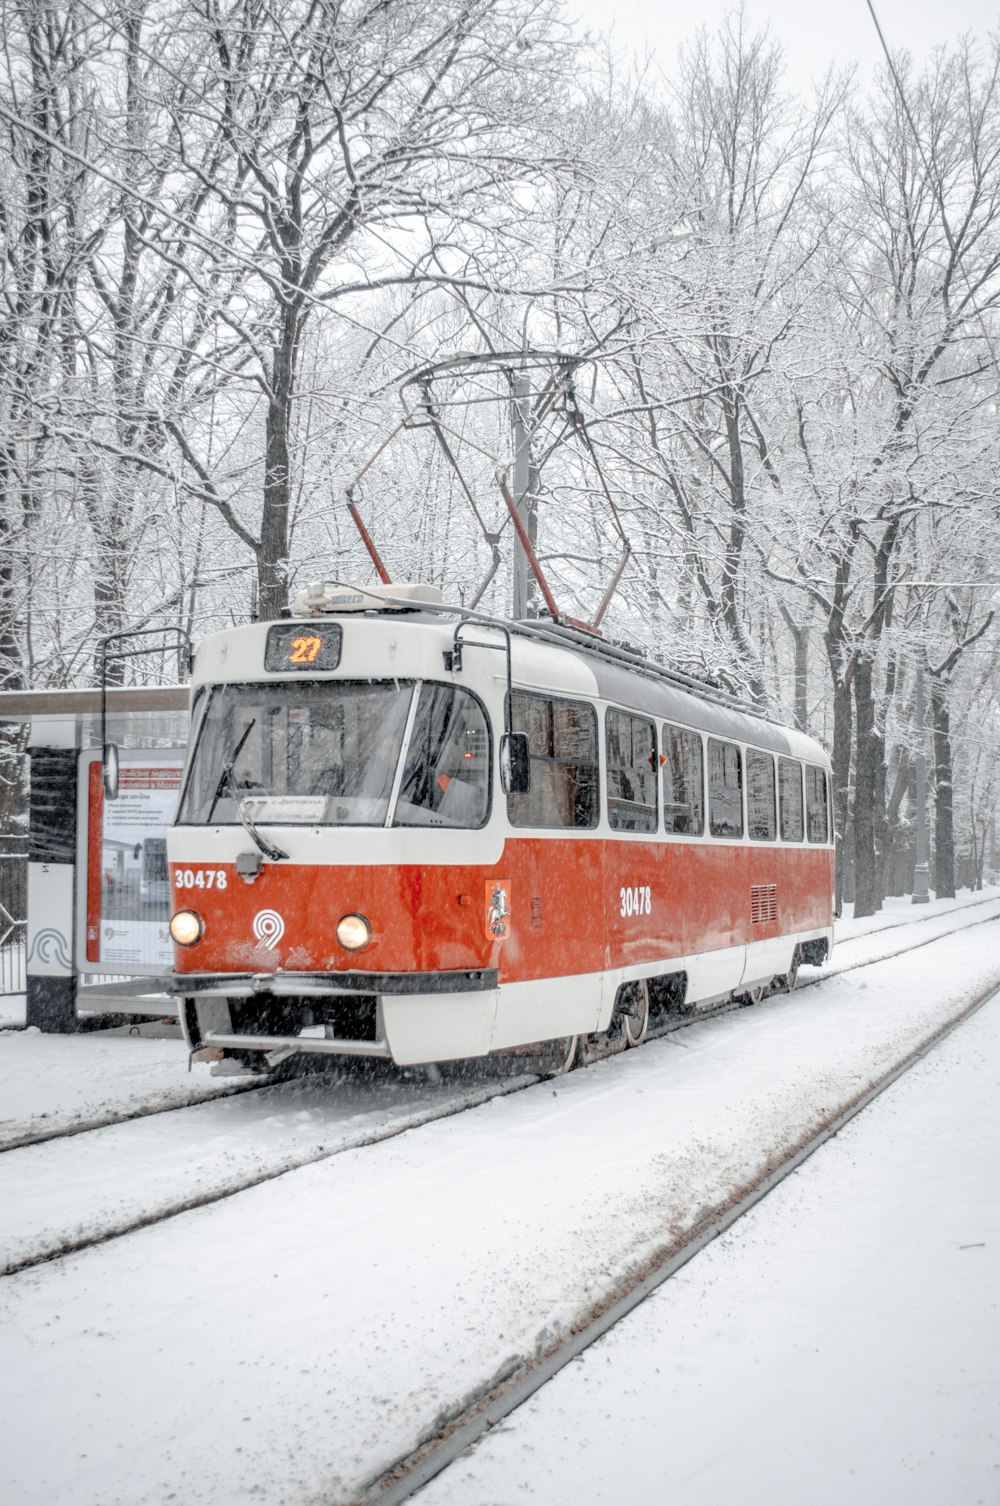 red and white tram on snow covered ground during daytime